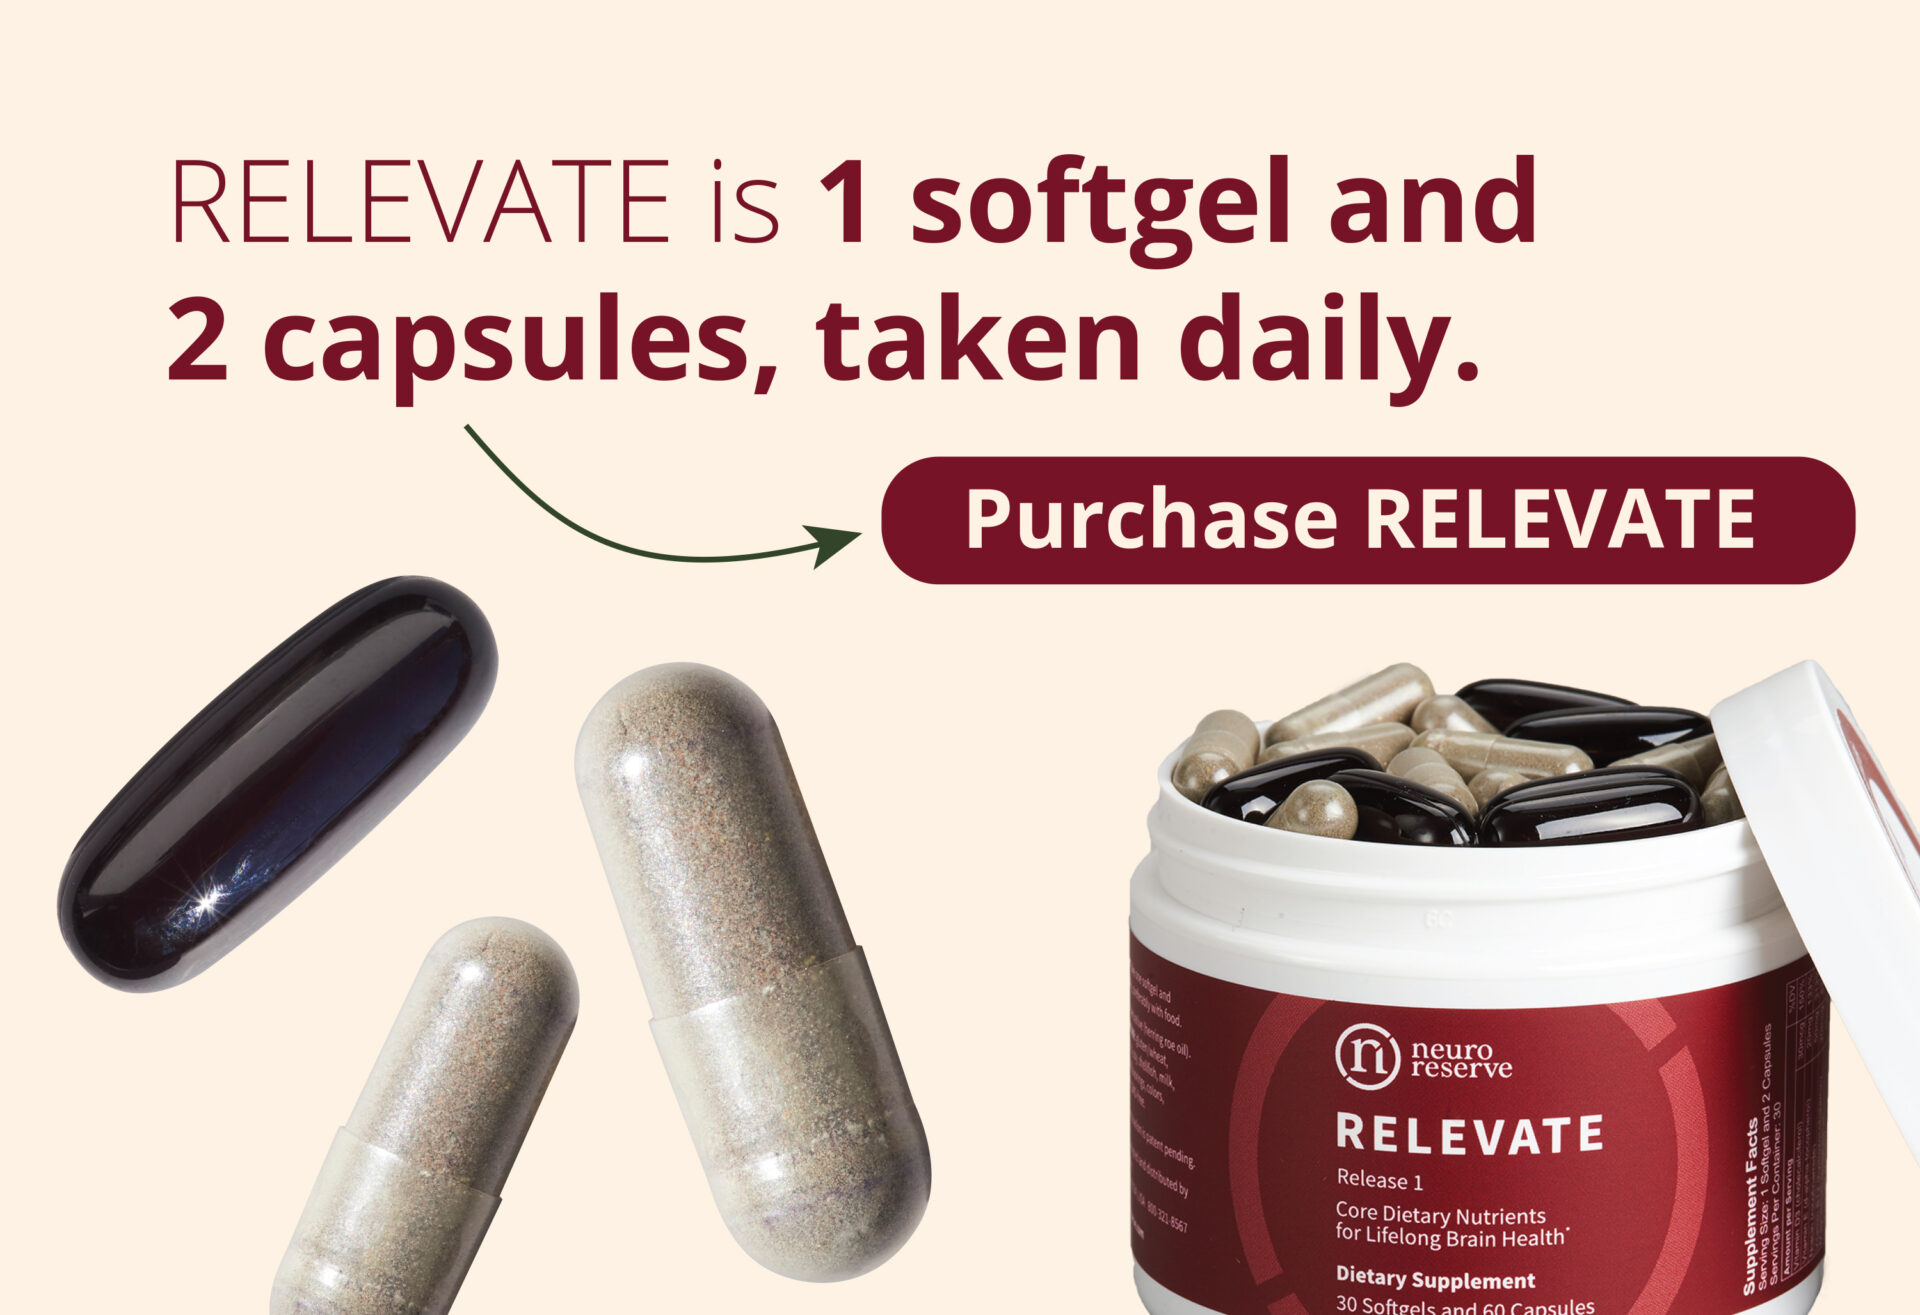 RELEVATE is 1 softgel and 2 capsules, taken daily. Neuro Reserve infographic